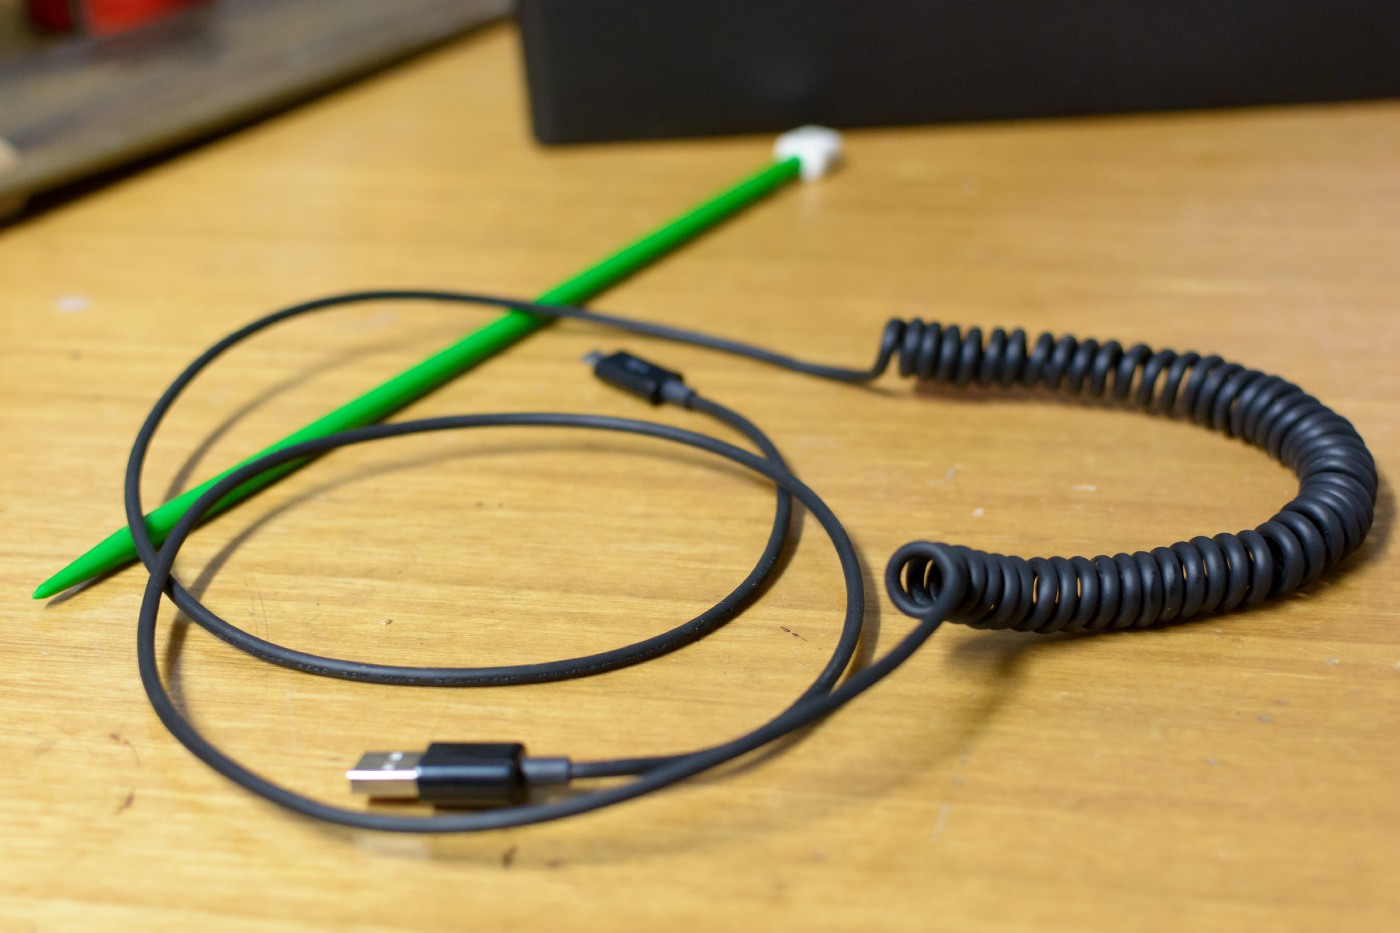 An image of an unevenly coiled cable resting on a wooden bench top.